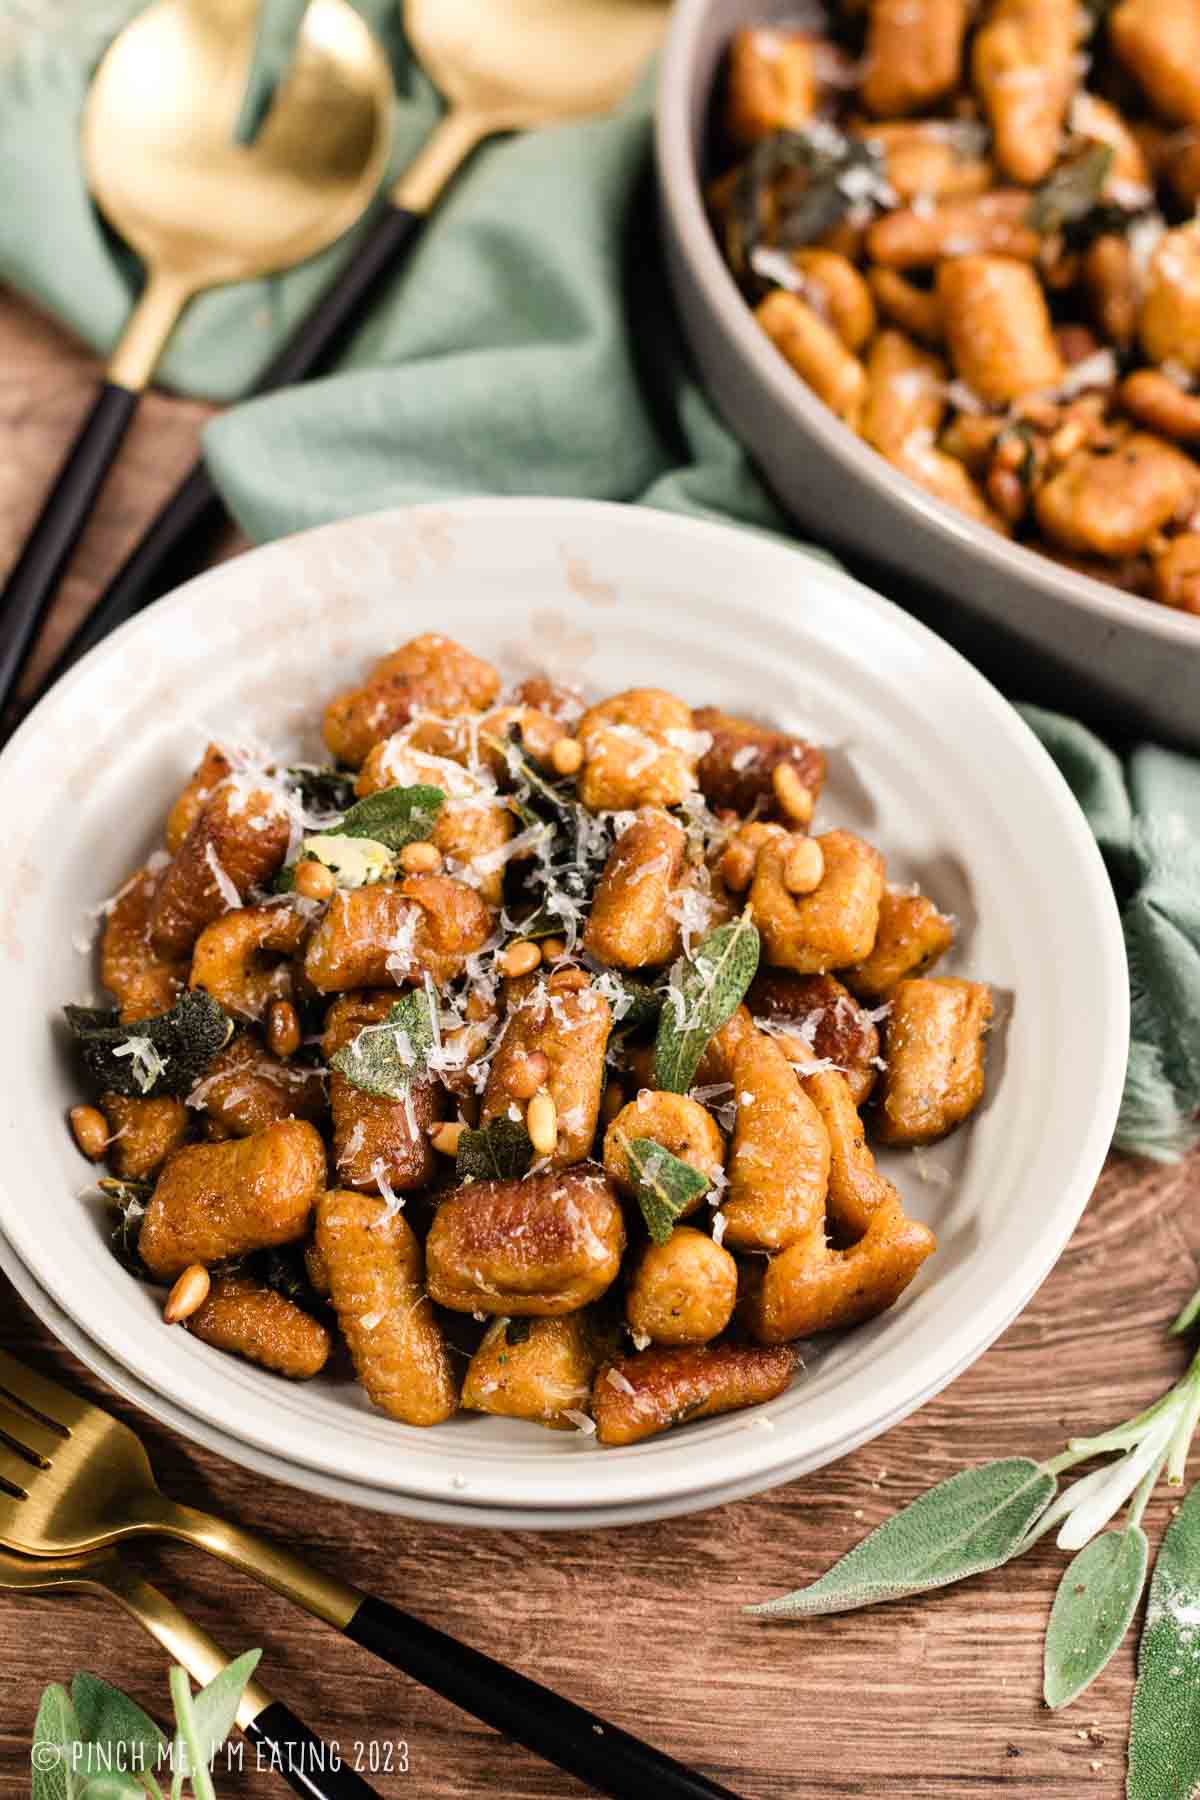 Homemade pumpkin gnocchi with crispy sage, pine nuts, and parmesan cheese in a bowl on a wood table with fresh sage leaves.